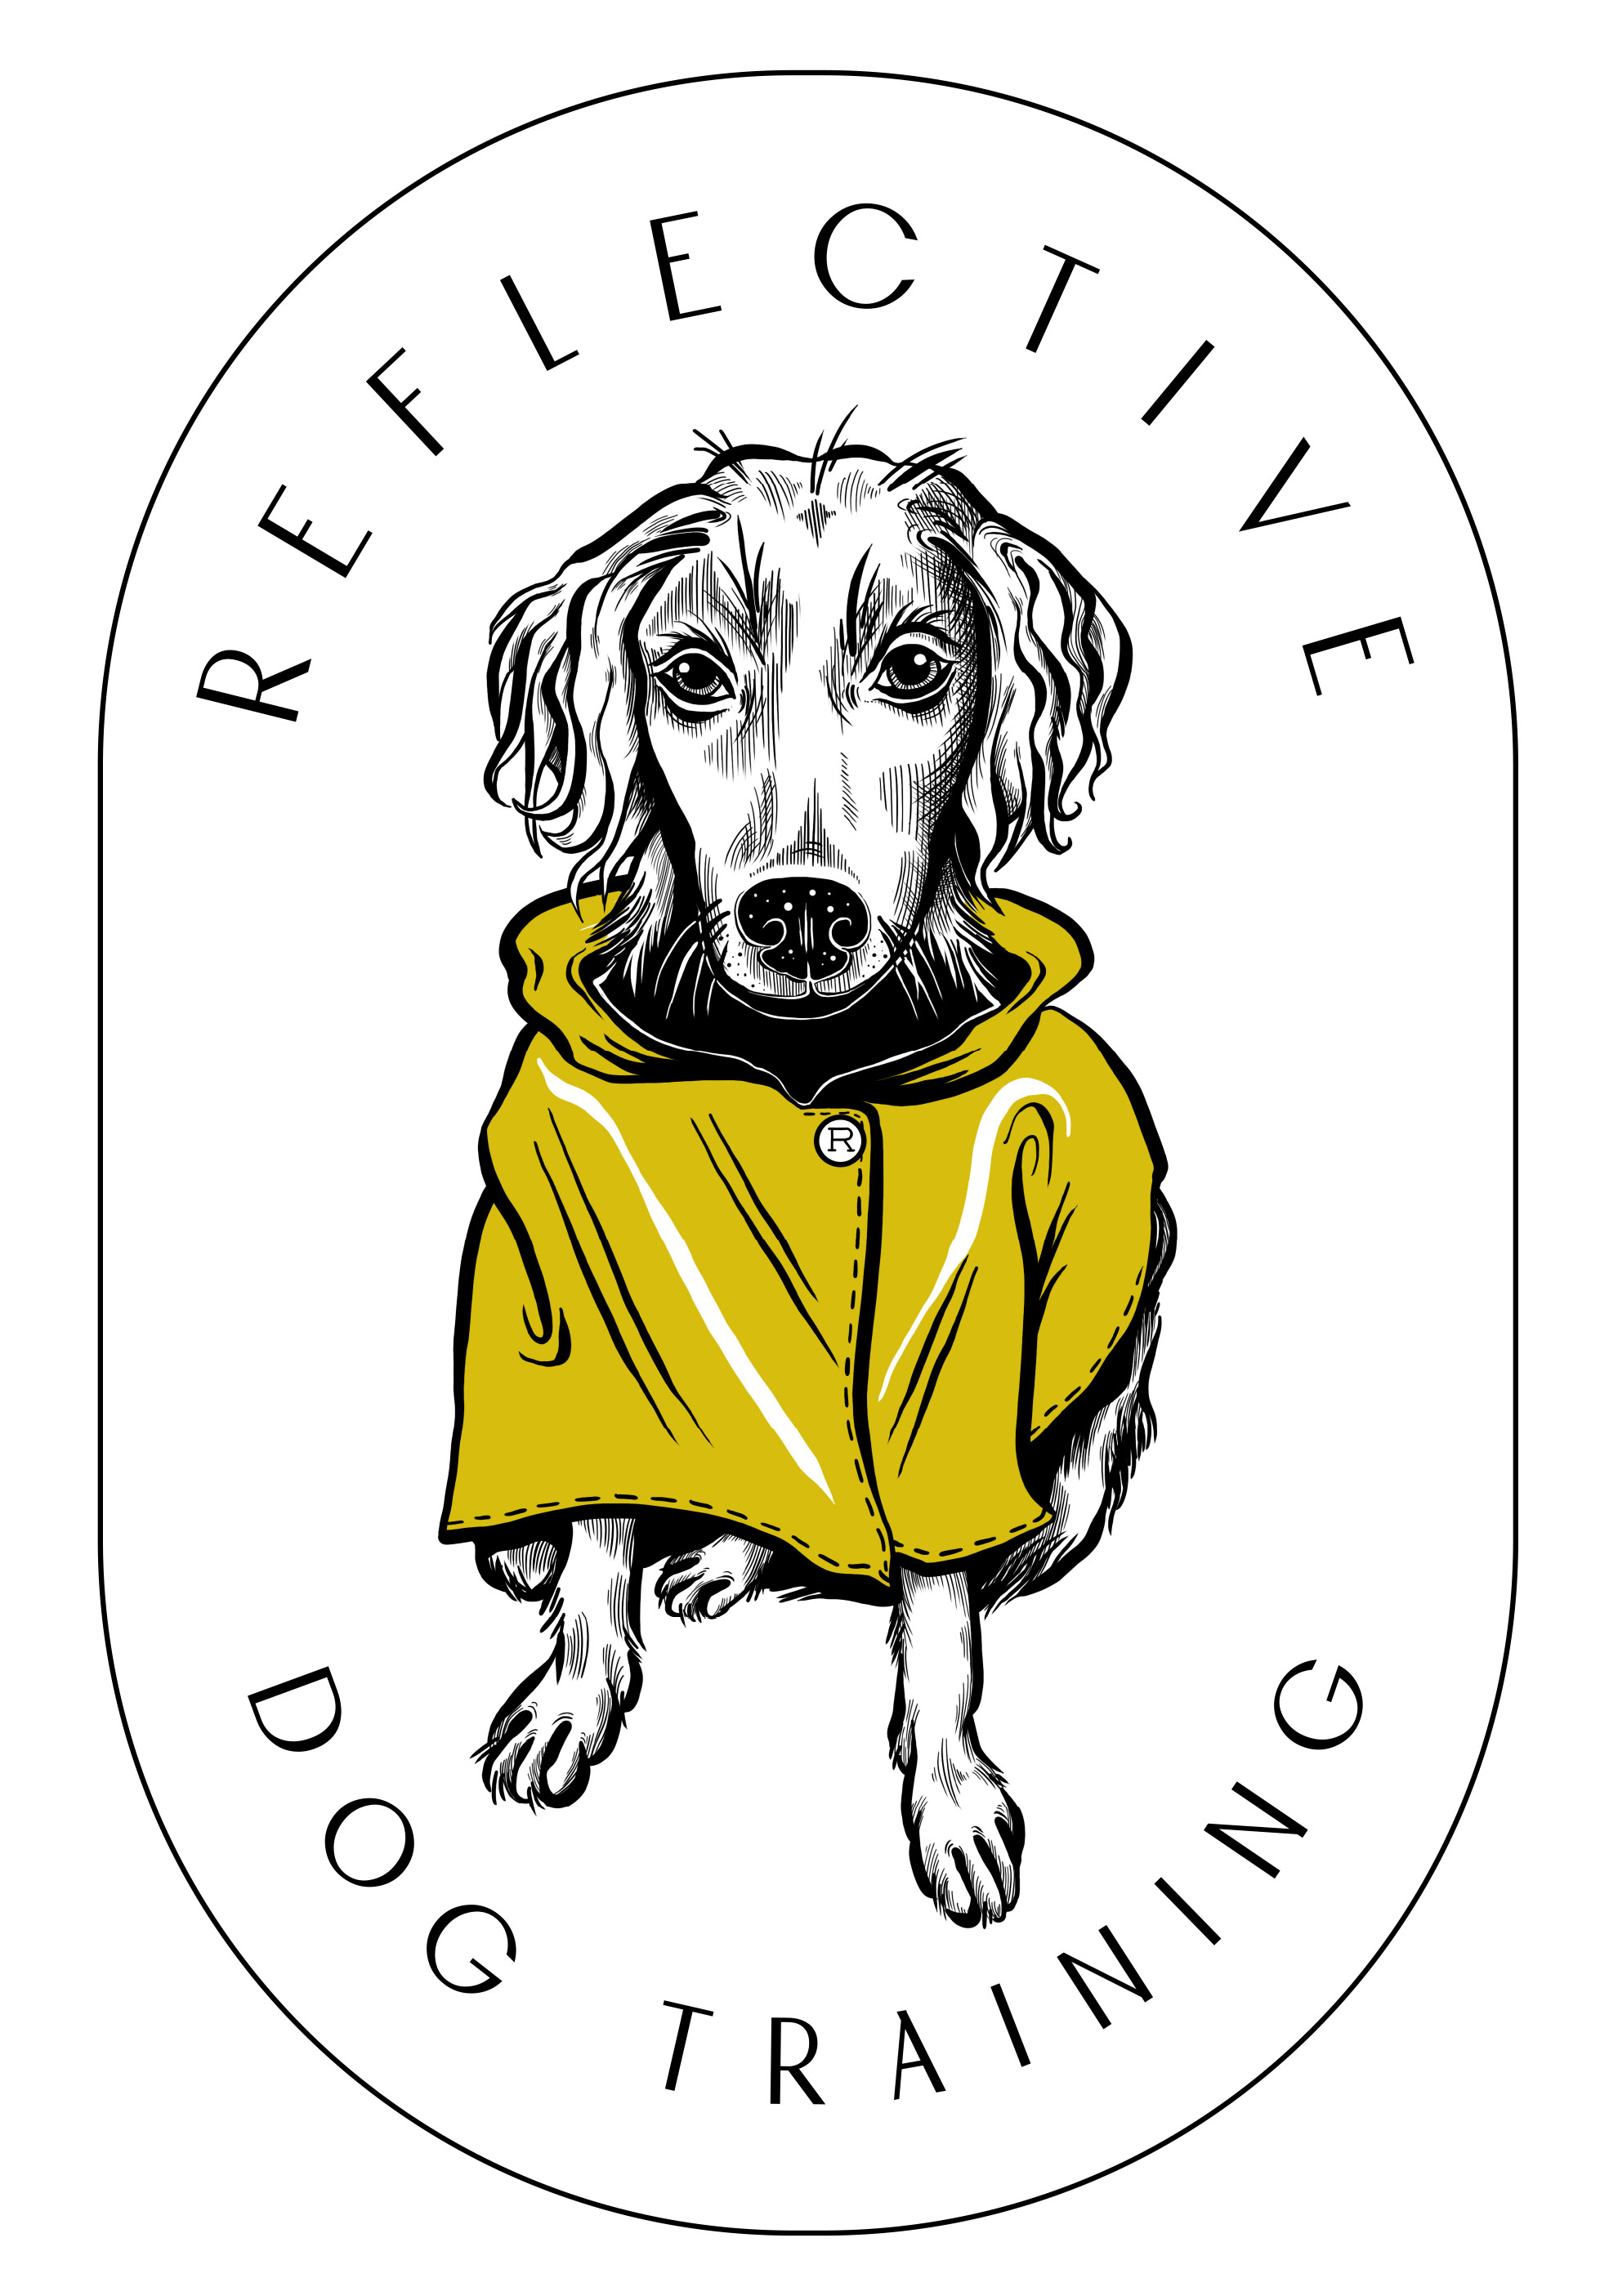 Reflective Dog Training logo featuring a black and white sketch of a dog wearing a yellow rainjacket.